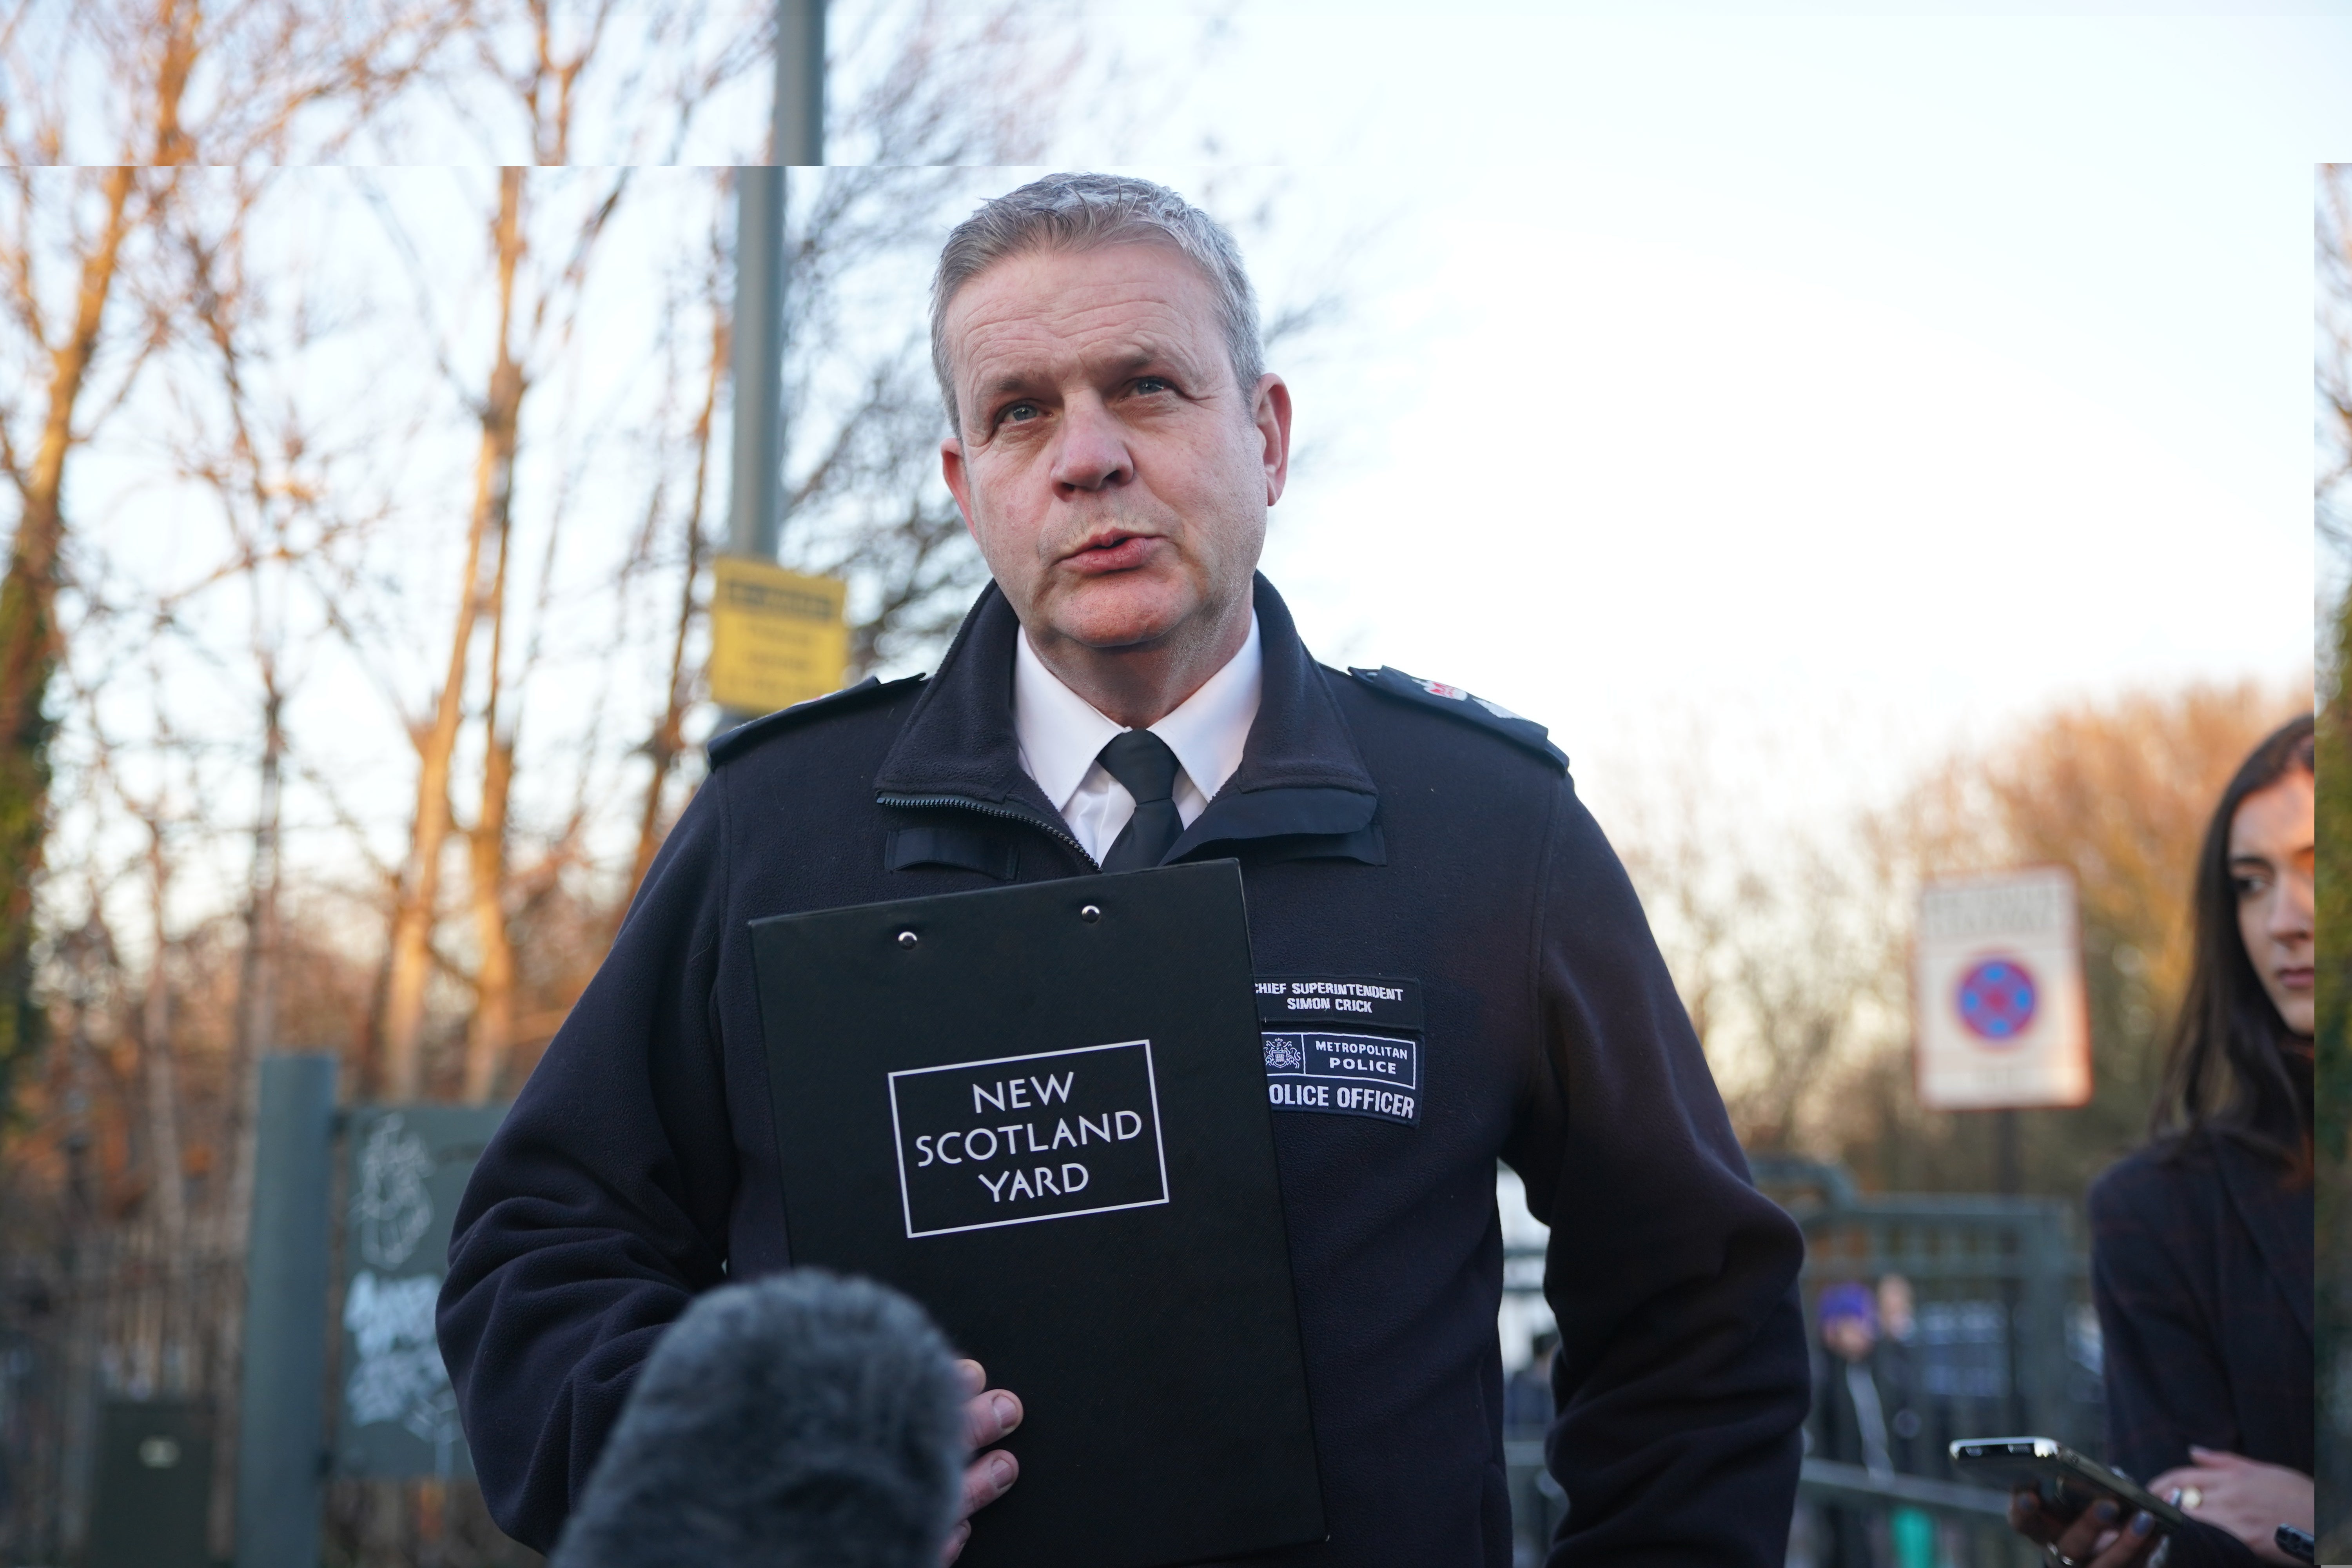 Chief Superintendent Simon Crick speaking at the time of the discovery of Baby Elsa’s body. He appealed for a woman spotted at the scene to come forward - but she has yet to make herself known to officers